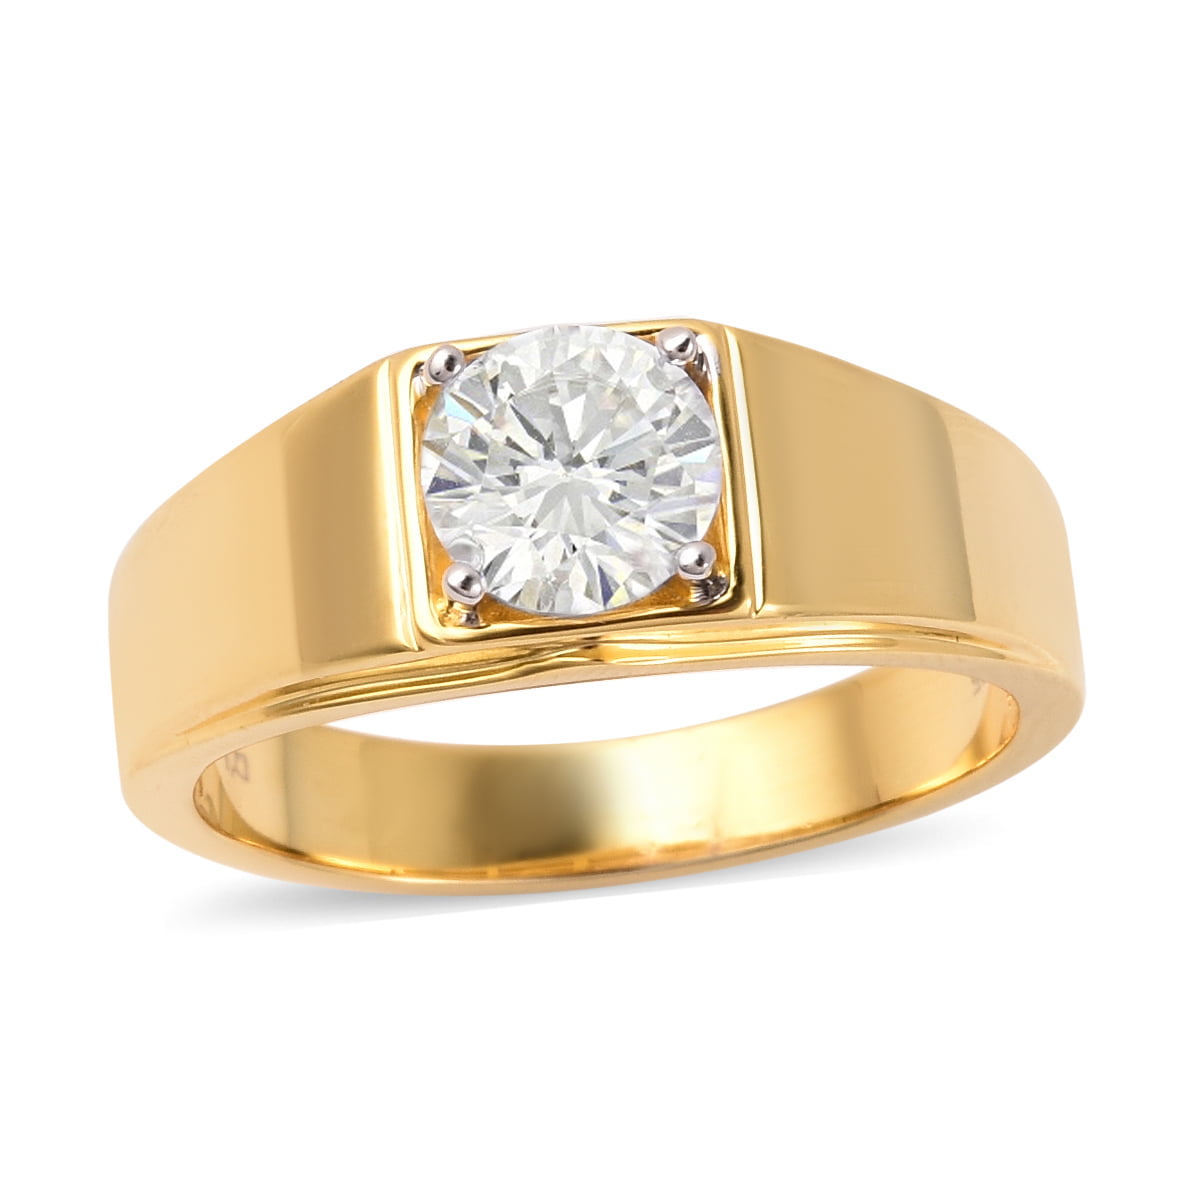 Shop LC - Shop LC 925 Sterling Silver Yellow Gold Over Moissanite Ring